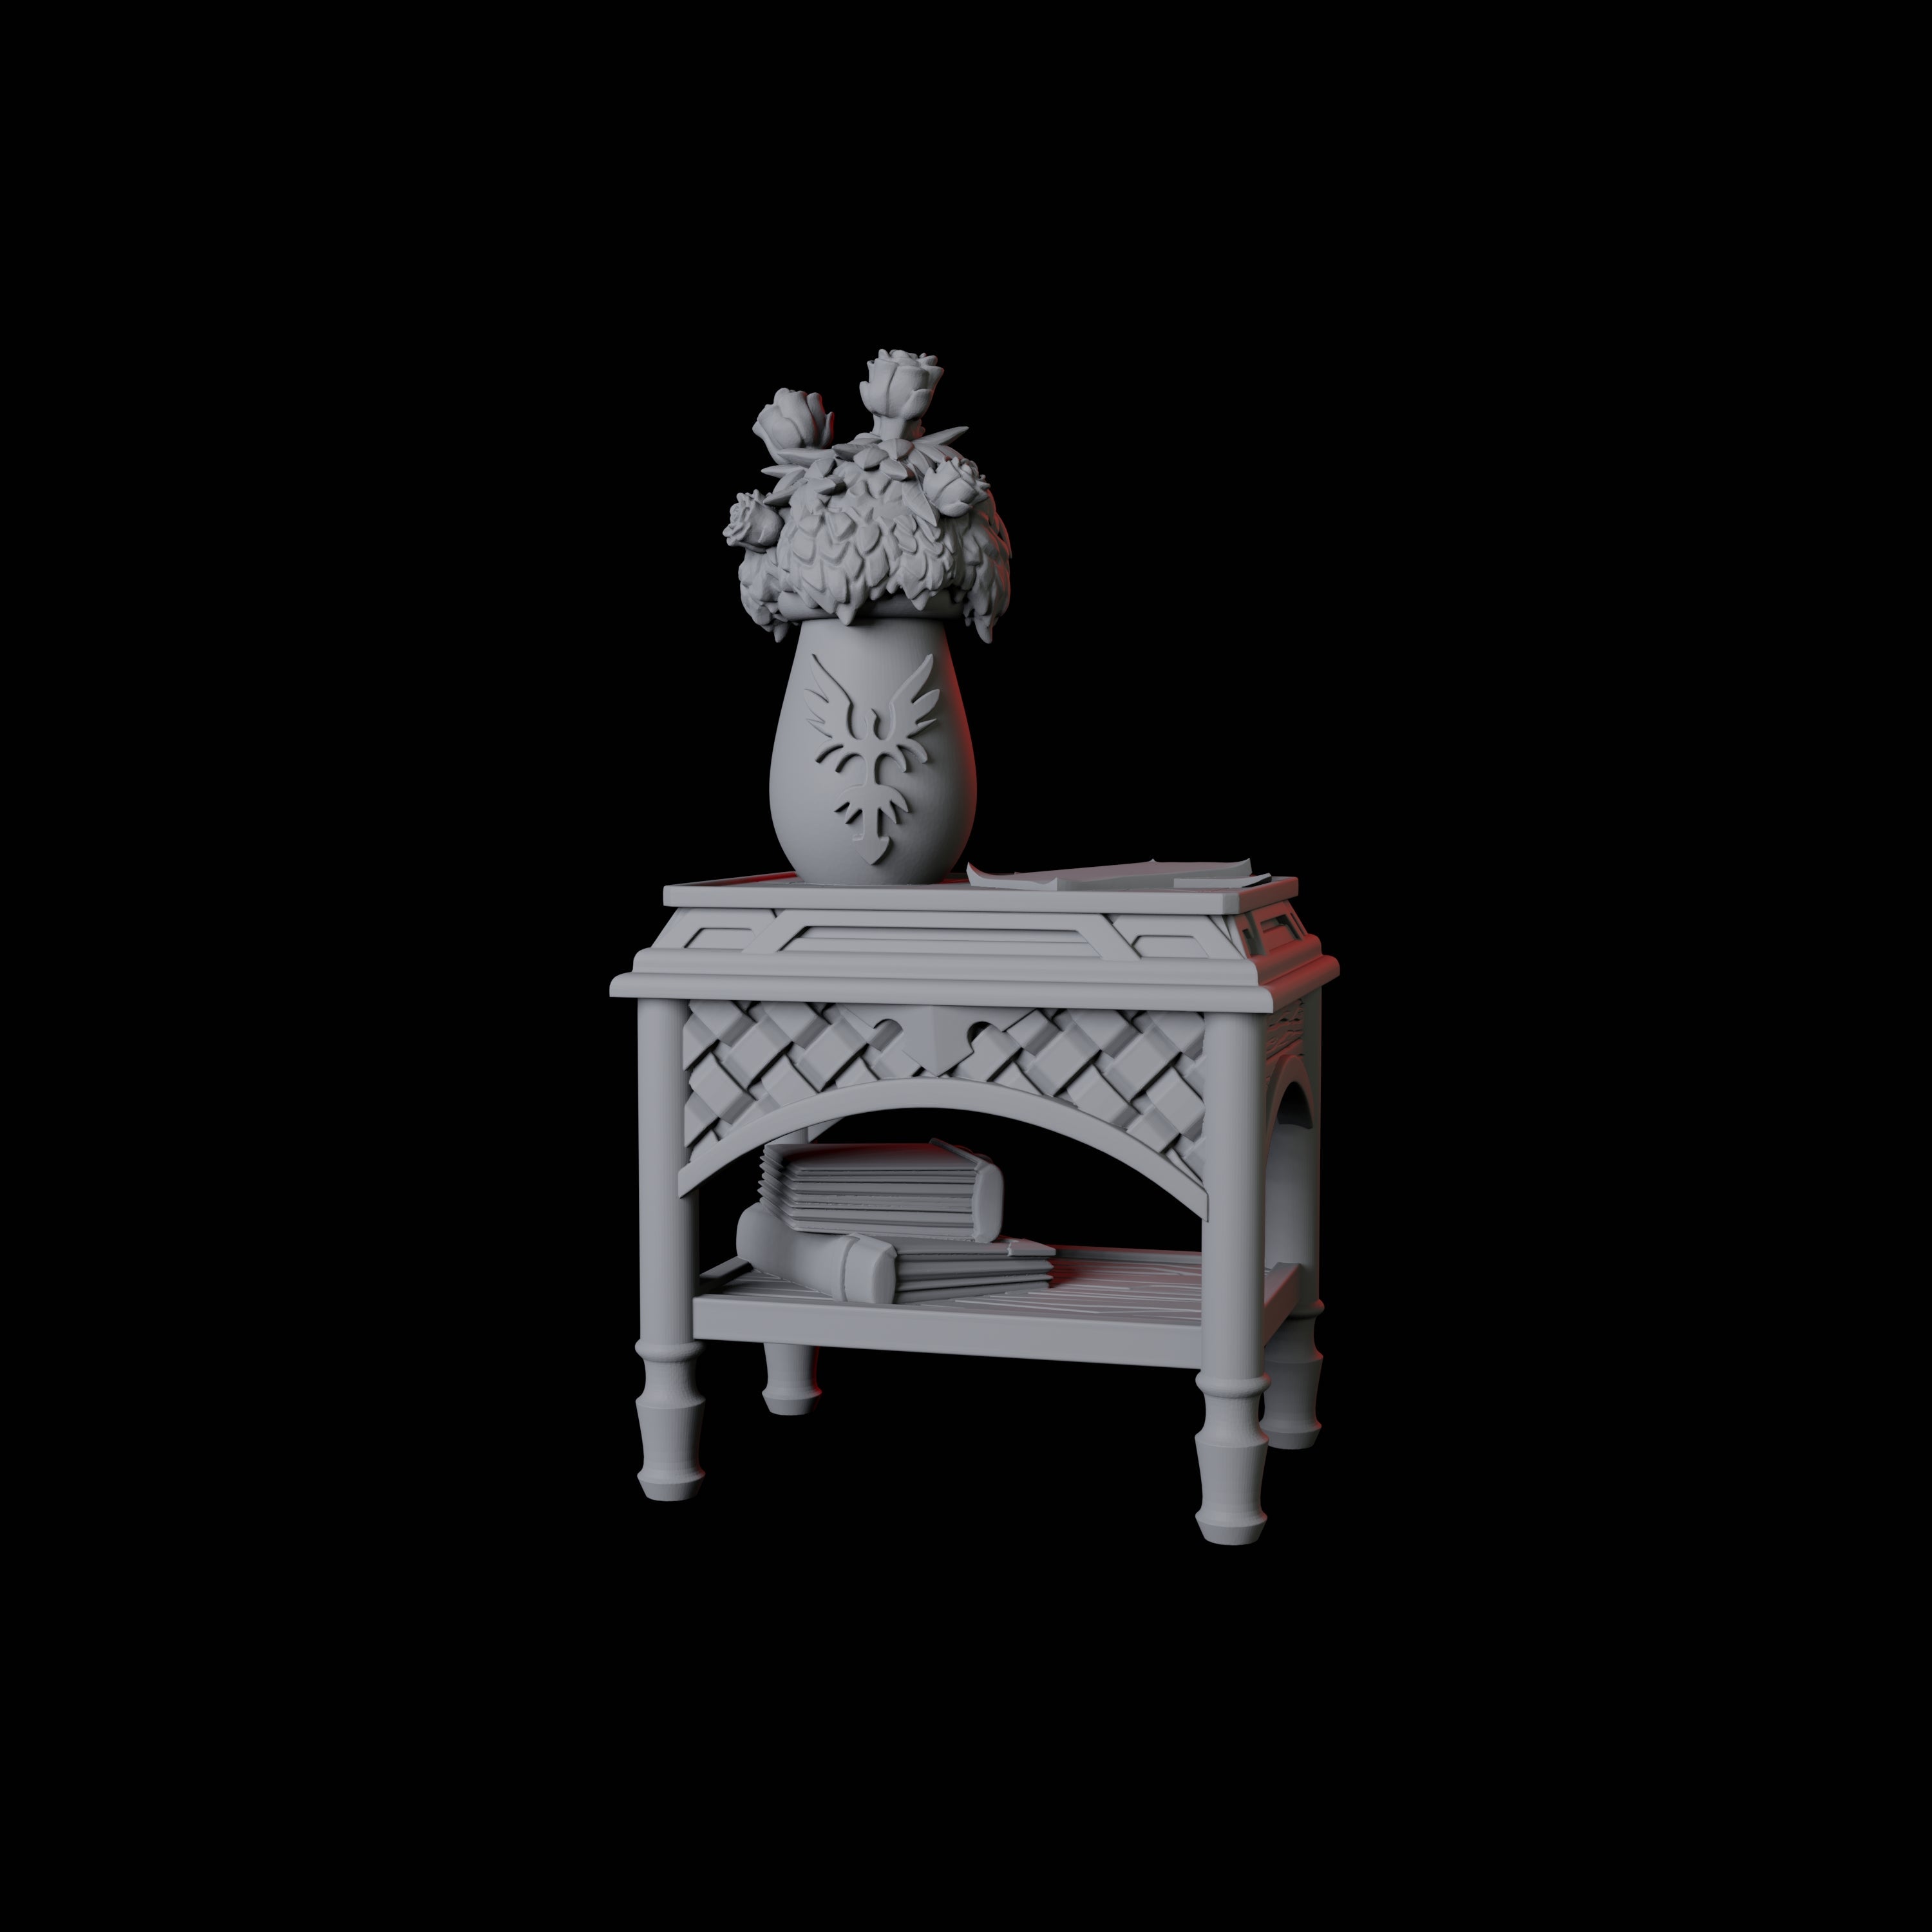 Bedside Table Miniature for Dungeons and Dragons, Pathfinder or other TTRPGs